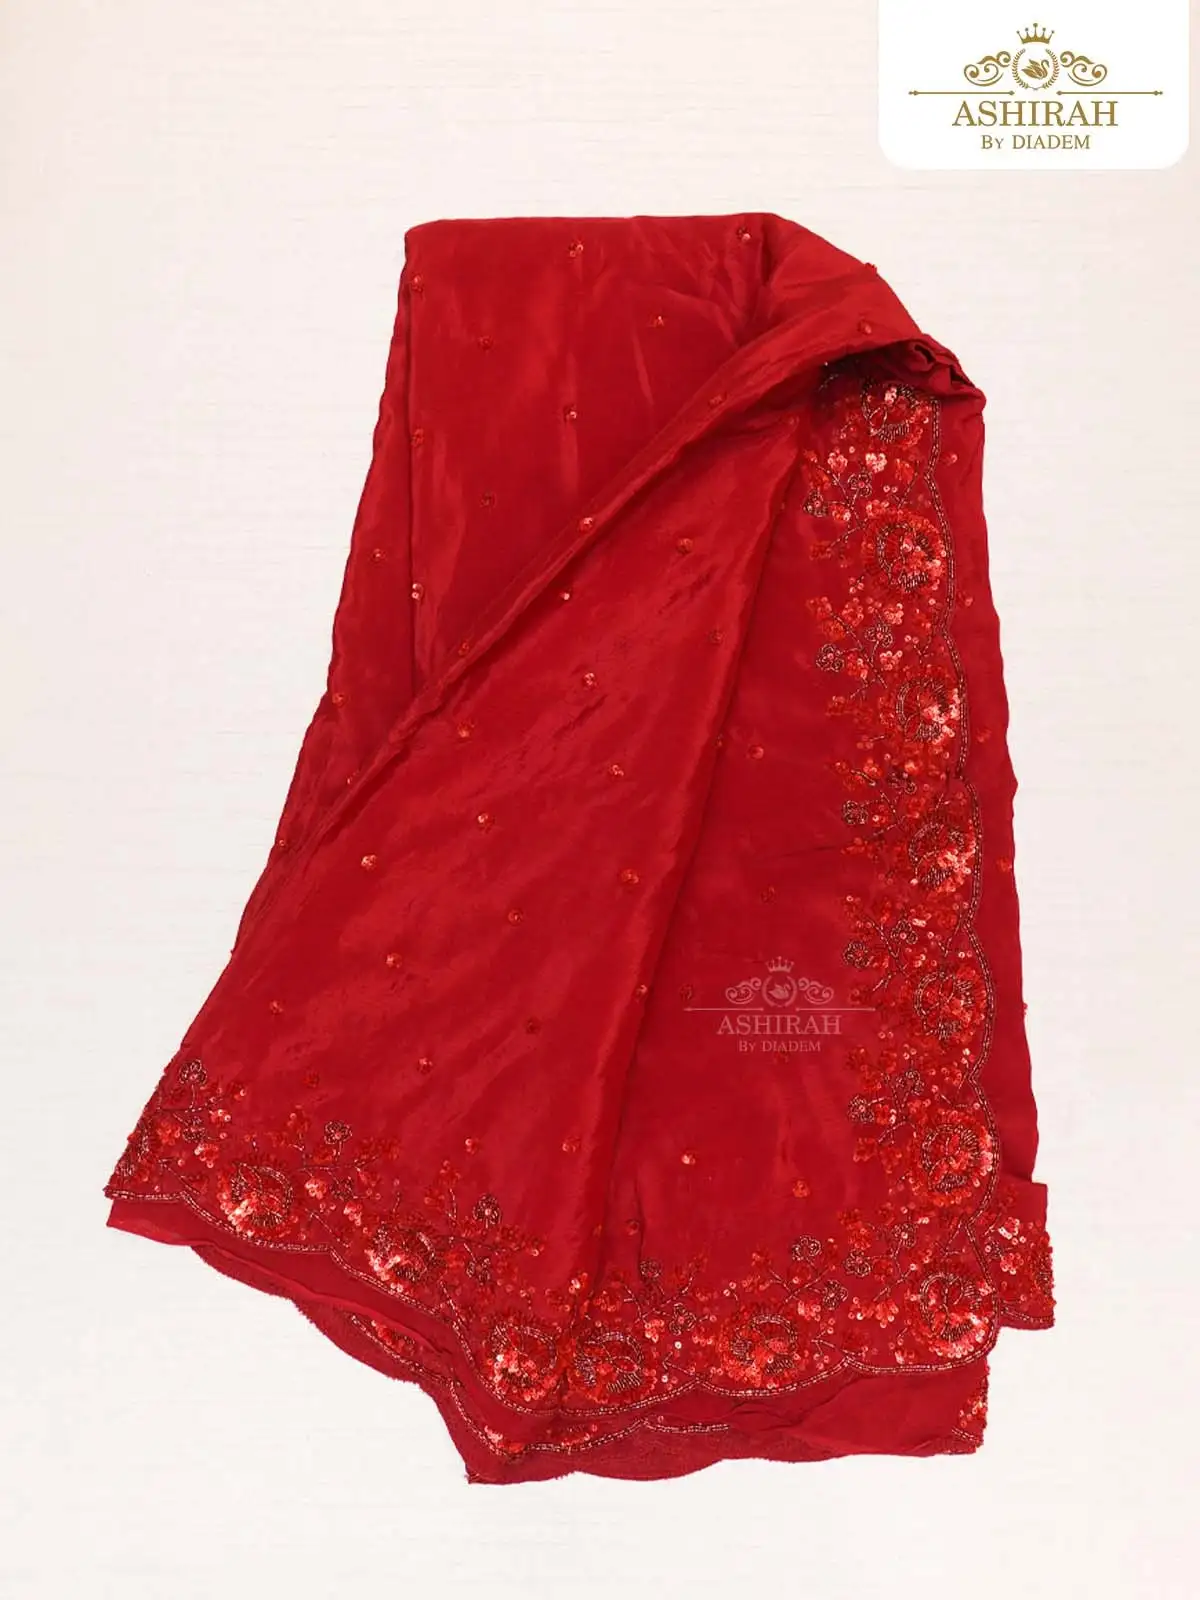 Red Organza Silk Saree Embellished With Floral Embroidery Border